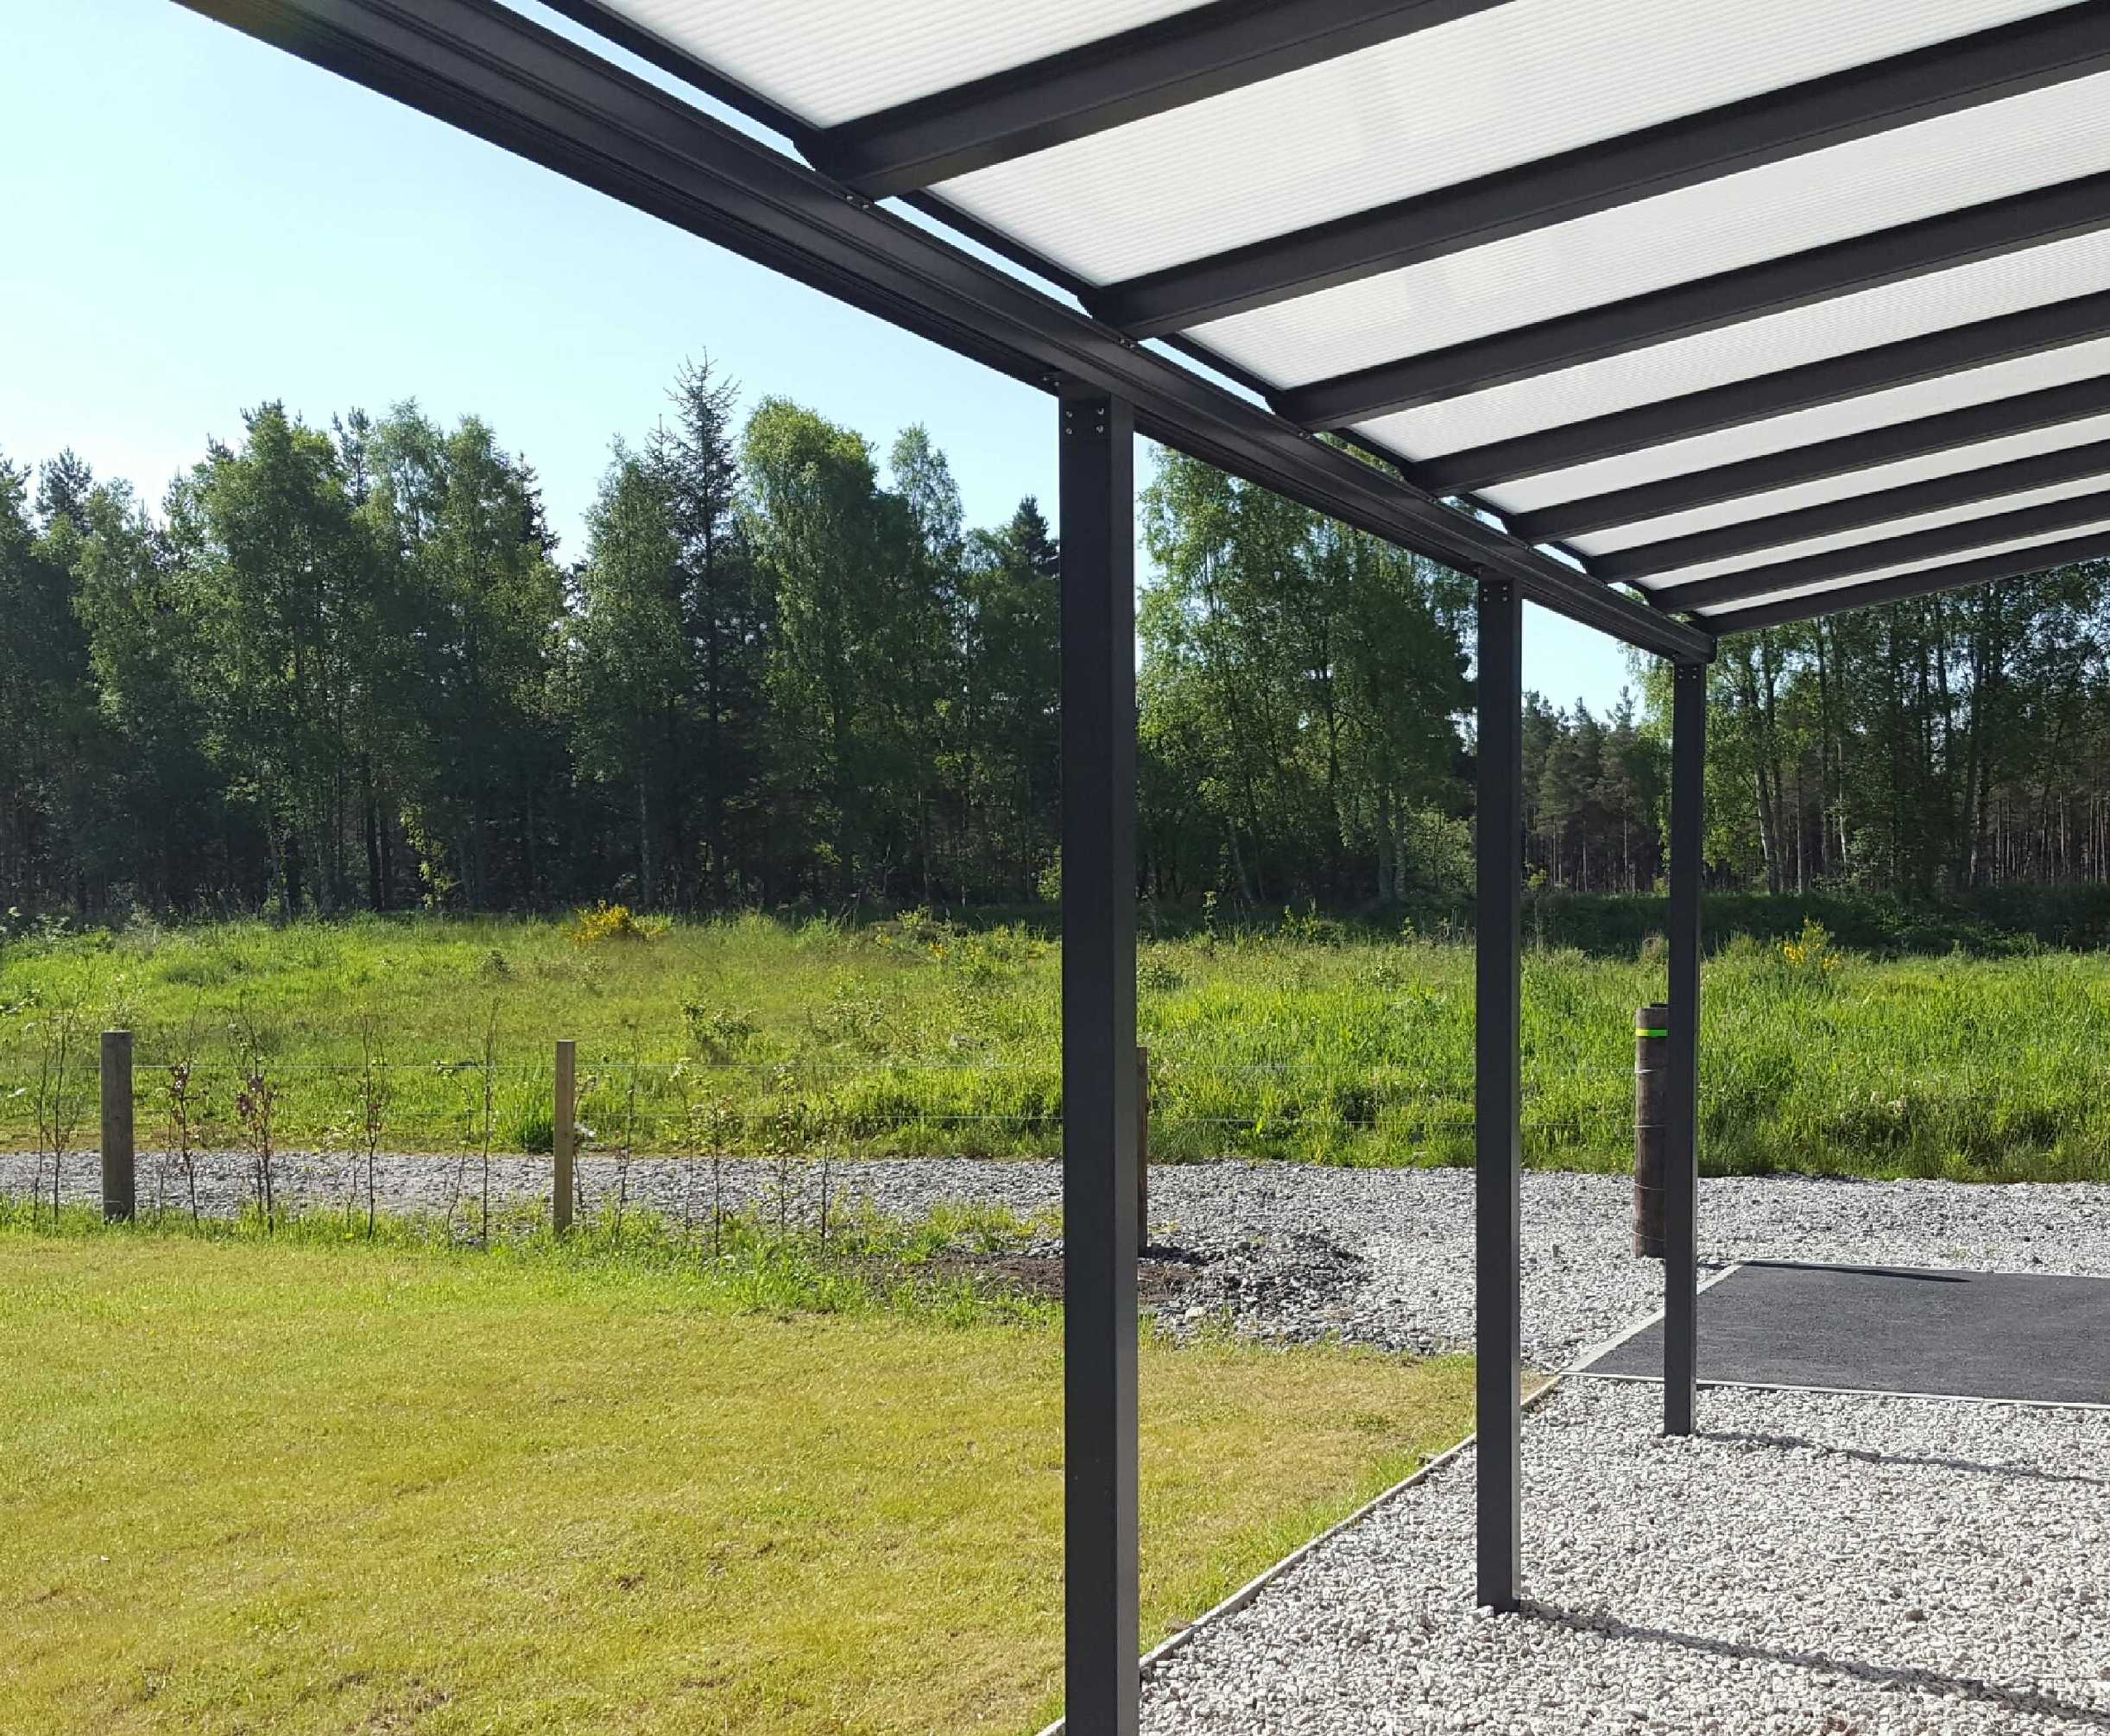 Omega Smart Lean-To Canopy, Anthracite Grey, 6mm Glass Clear Plate Polycarbonate Glazing - 10.5m (W) x 2.5m (P), (5) Supporting Posts